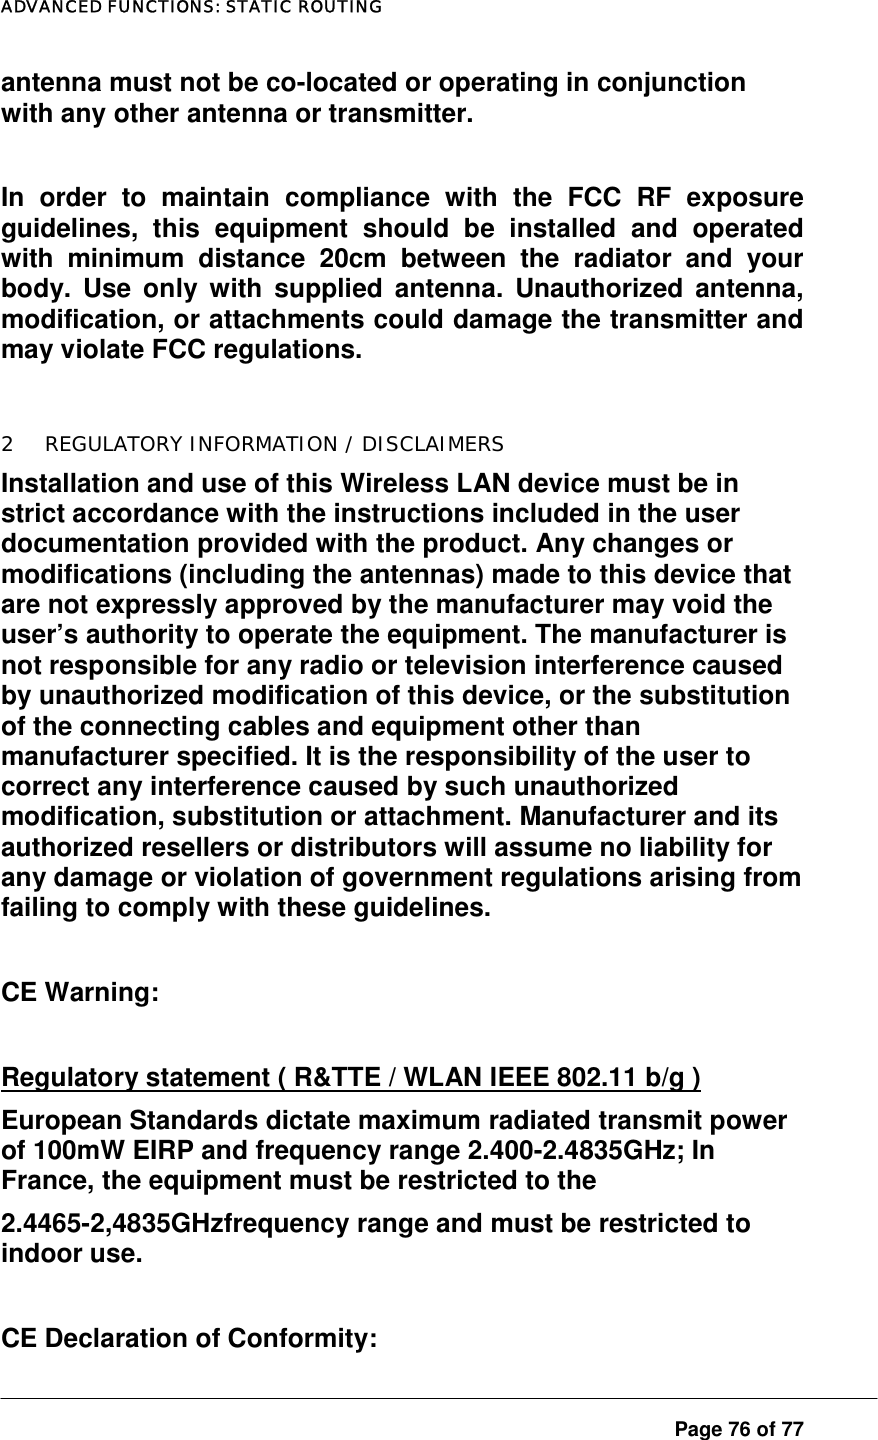 ADVANCED FUNCTIONS: STATIC ROUTING  Page 76 of 77 antenna must not be co-located or operating in conjunction with any other antenna or transmitter.   In order to maintain compliance with the FCC RF exposure guidelines, this equipment should be installed and operated with minimum distance 20cm between the radiator and your body. Use only with supplied antenna. Unauthorized antenna, modification, or attachments could damage the transmitter and may violate FCC regulations.  2  REGULATORY INFORMATION / DISCLAIMERS Installation and use of this Wireless LAN device must be in strict accordance with the instructions included in the user documentation provided with the product. Any changes or modifications (including the antennas) made to this device that are not expressly approved by the manufacturer may void the user’s authority to operate the equipment. The manufacturer is not responsible for any radio or television interference caused by unauthorized modification of this device, or the substitution of the connecting cables and equipment other than manufacturer specified. It is the responsibility of the user to correct any interference caused by such unauthorized modification, substitution or attachment. Manufacturer and its authorized resellers or distributors will assume no liability for any damage or violation of government regulations arising from failing to comply with these guidelines.  CE Warning:  Regulatory statement ( R&amp;TTE / WLAN IEEE 802.11 b/g ) European Standards dictate maximum radiated transmit power of 100mW EIRP and frequency range 2.400-2.4835GHz; In France, the equipment must be restricted to the 2.4465-2,4835GHzfrequency range and must be restricted to indoor use.    CE Declaration of Conformity: 